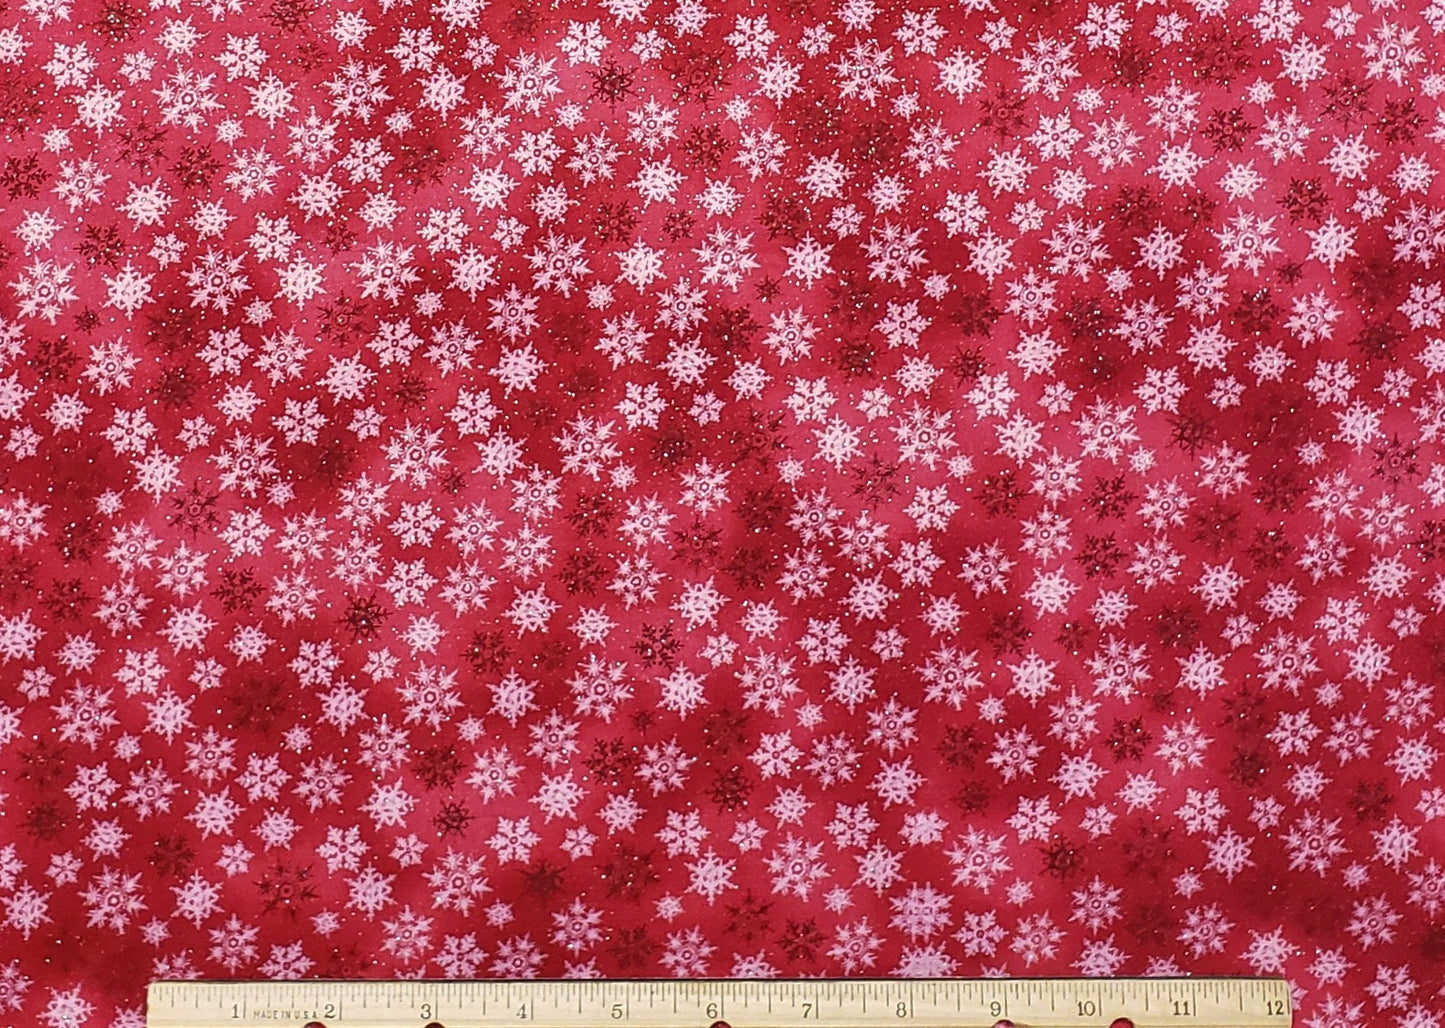 Designed Exclusively for JoAnn - Dark Pink and Red Tonal Fabric / Darker Red / White Snowflakes / Iridescent Glitter